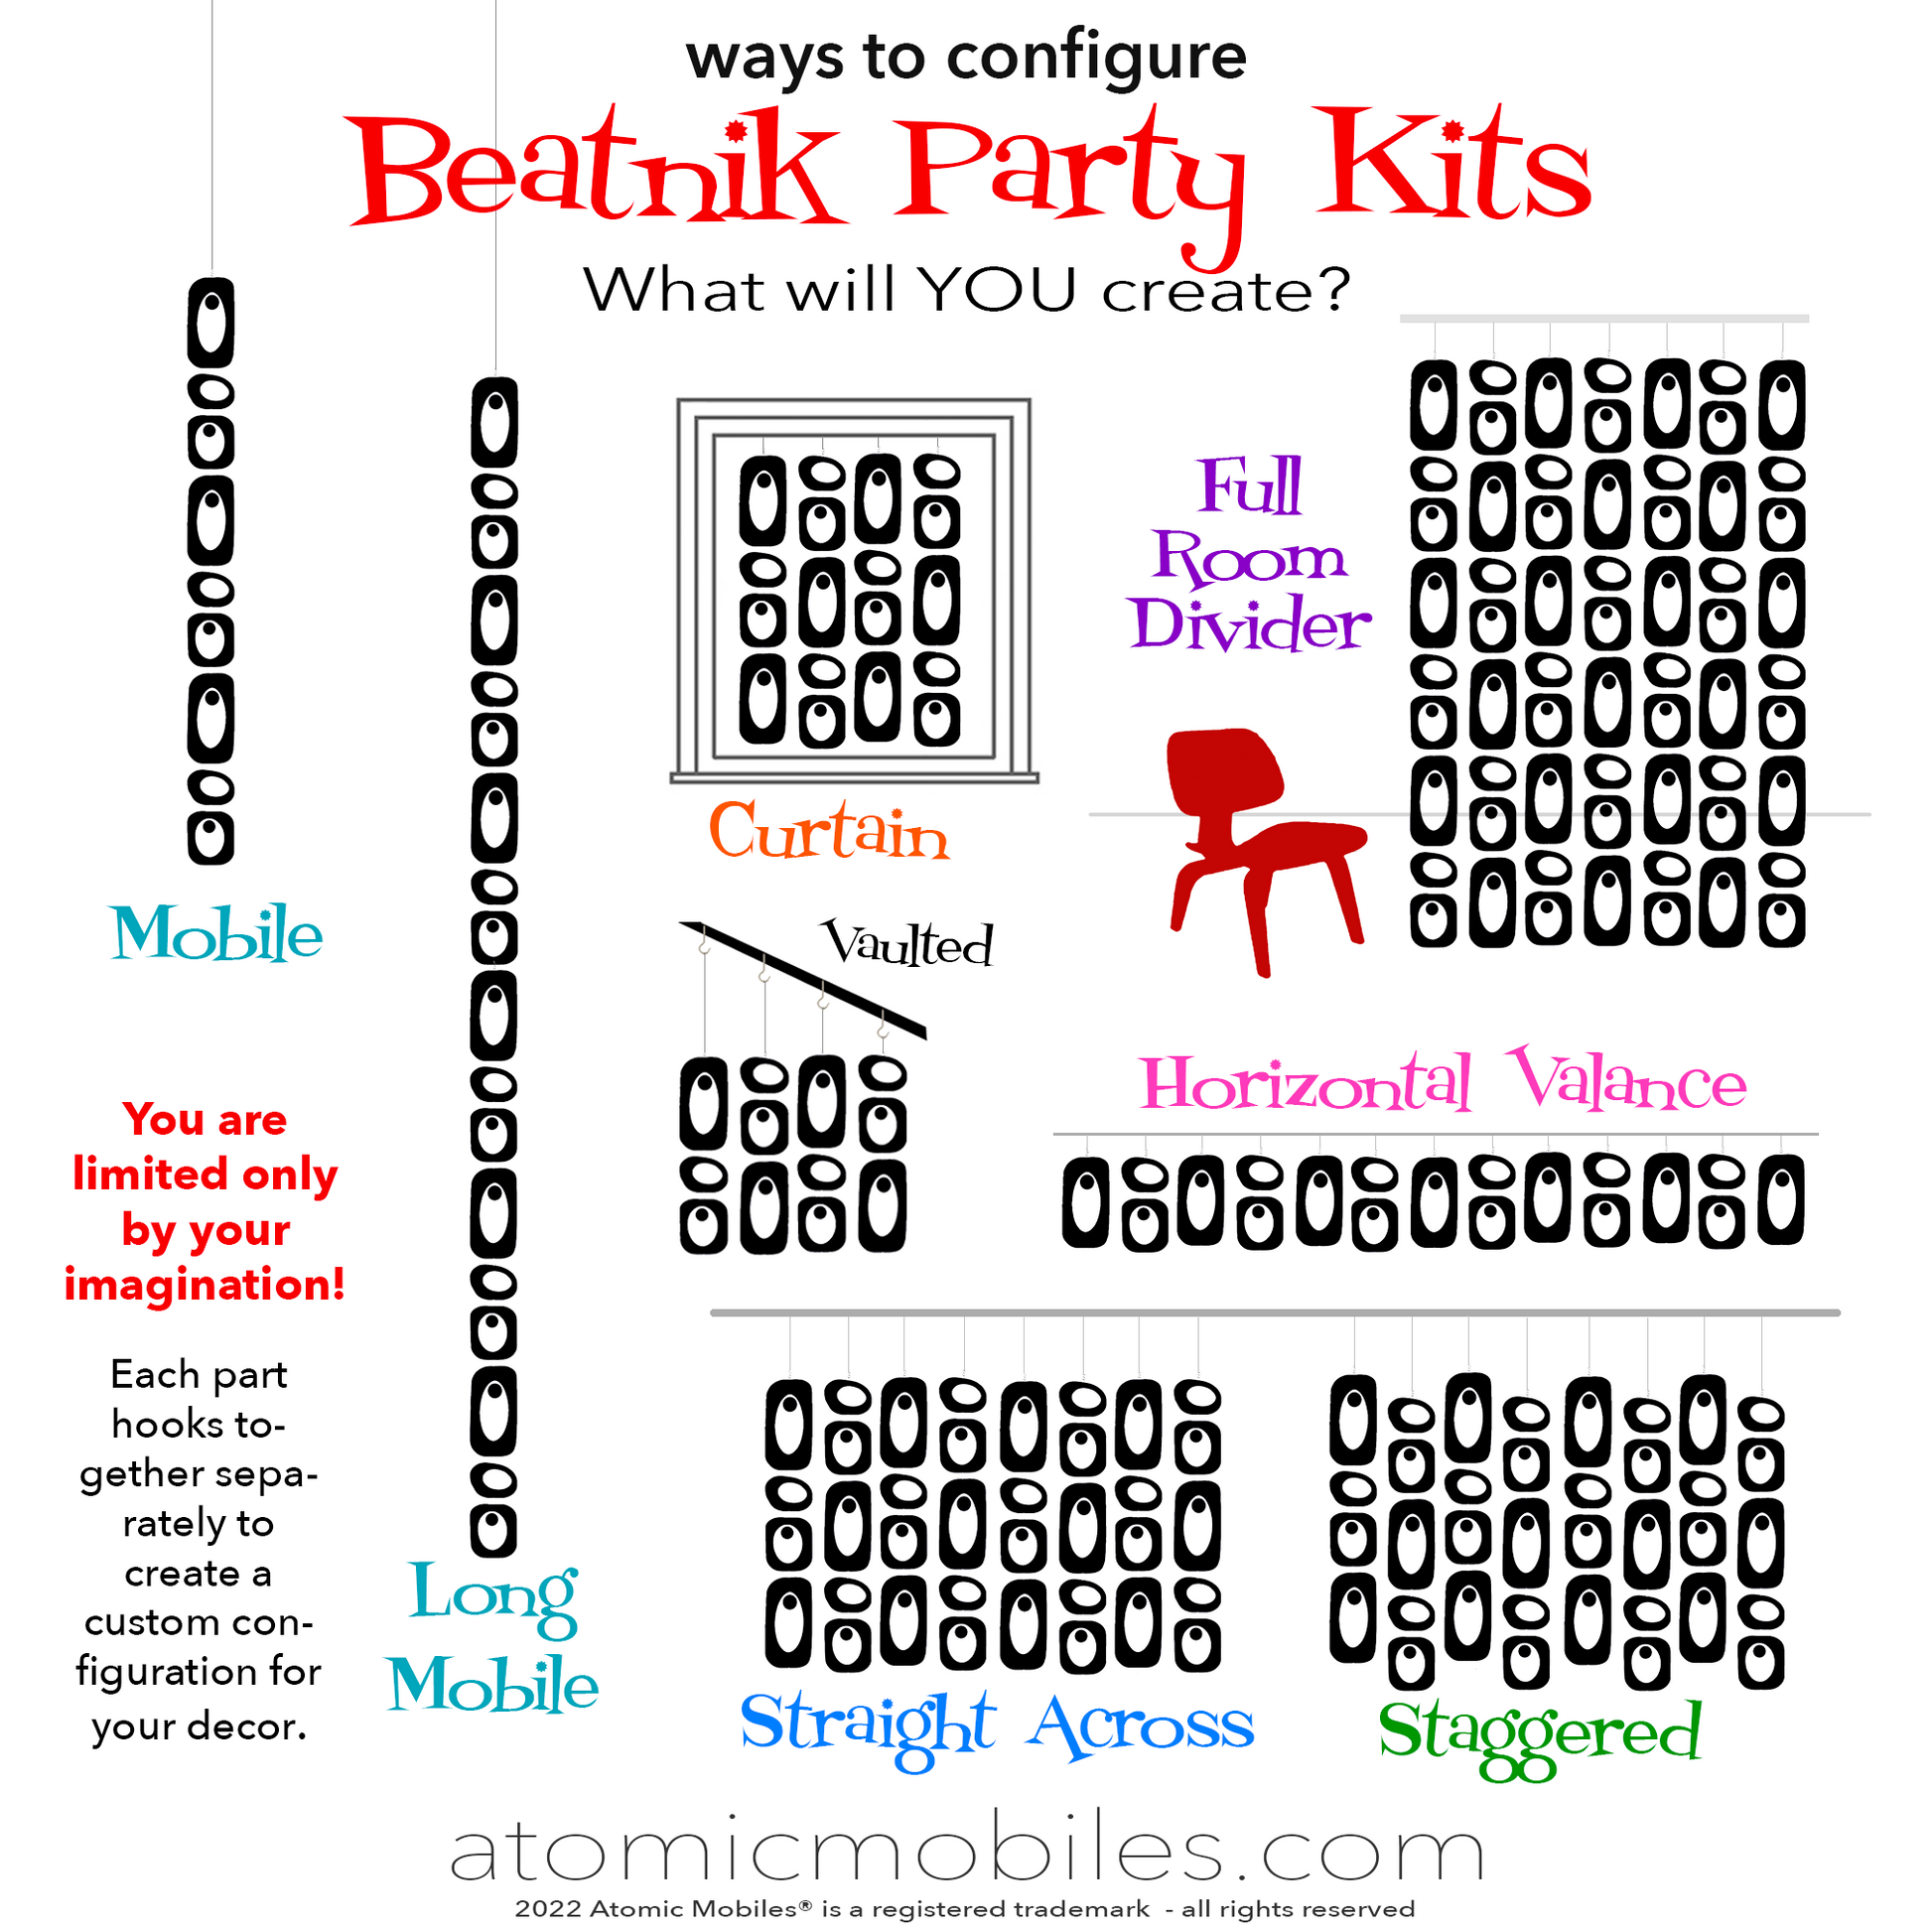 Beatnik Party Inspo for mobiles, curtains, full room dividers, valances, and more! by AtomicMobiles.com